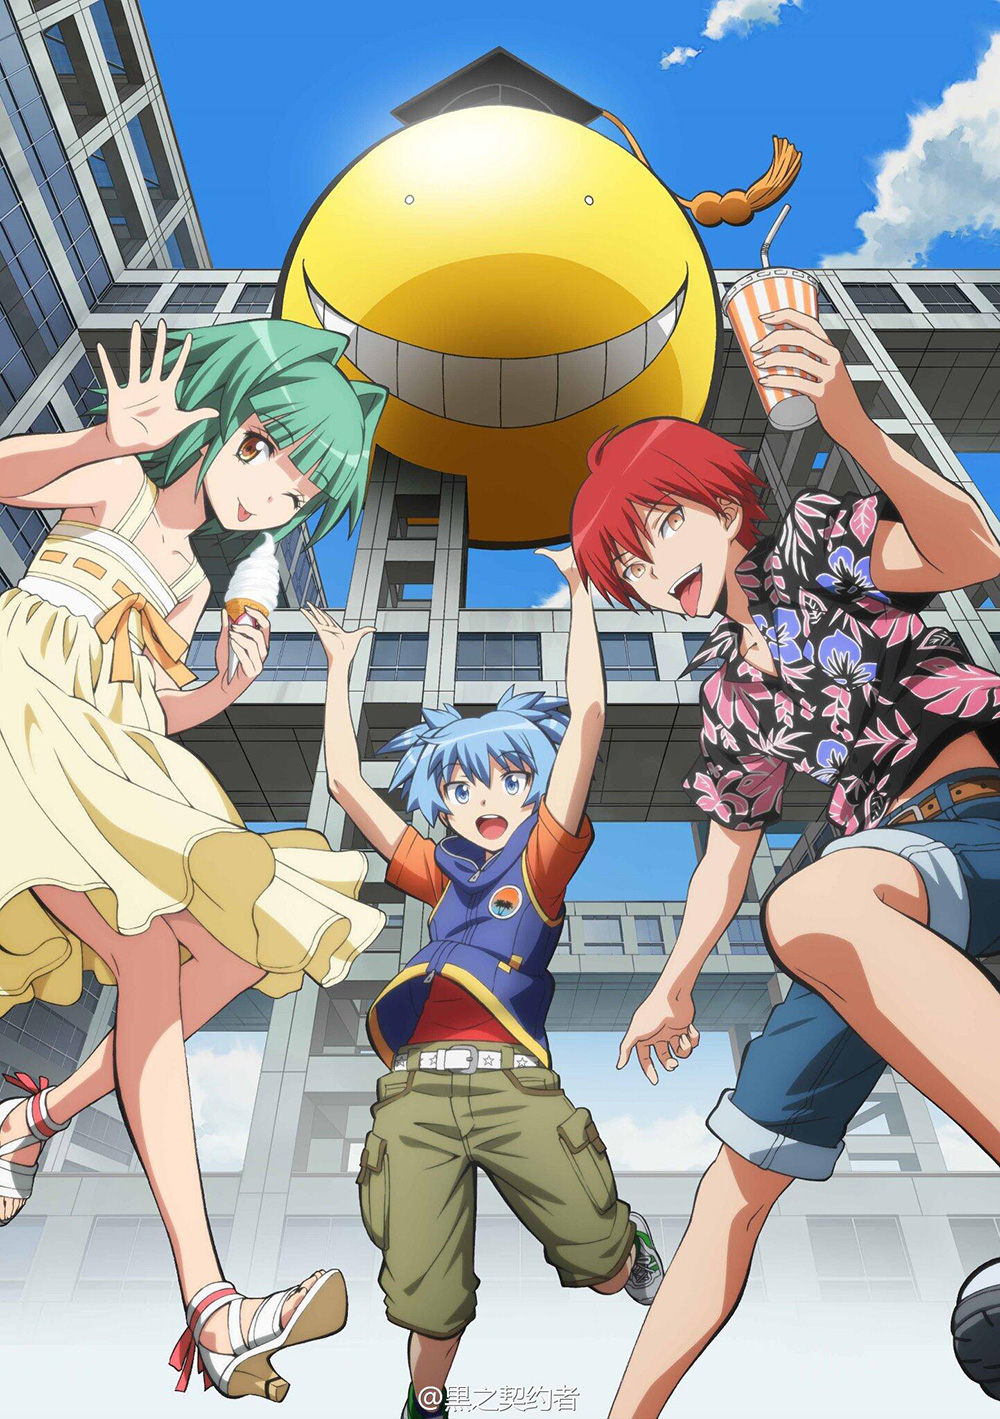 Assassination Classroom Episode 22 Preview Images Video And Synopsis